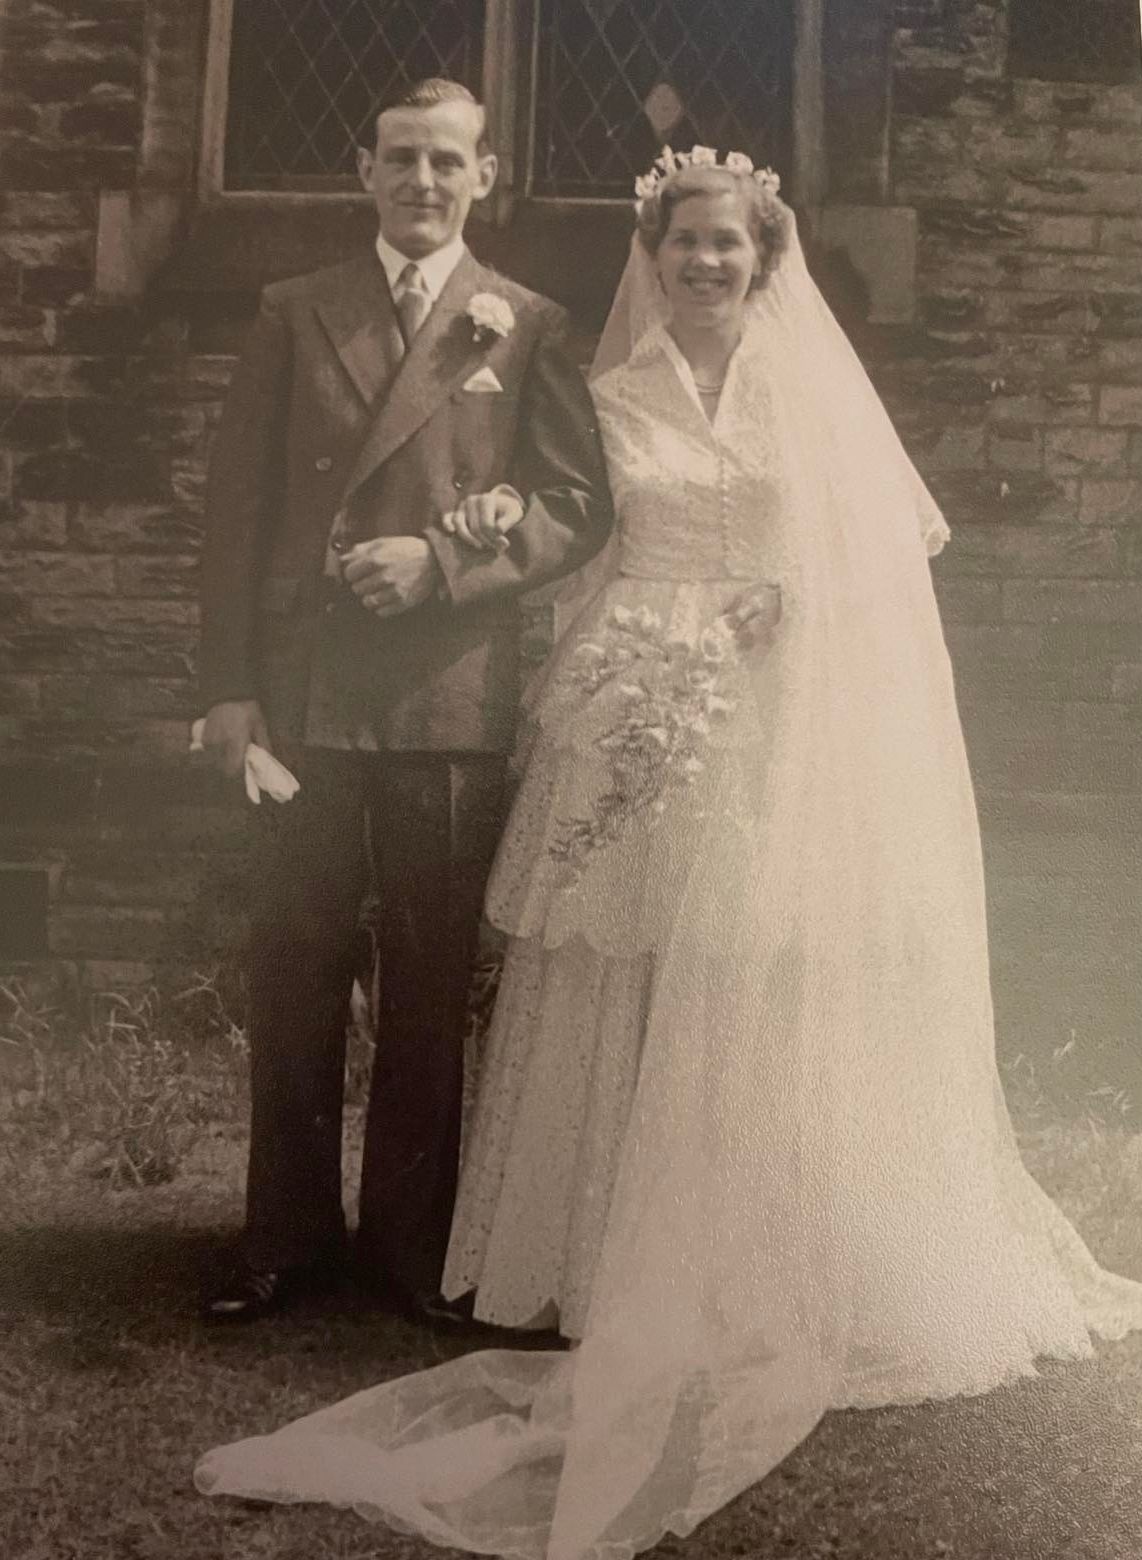 Vera Guest aged 94 who worked as an usherette at The Grand in Southport during World War Two has been treated to a VIP afternoon tea there. Vera Guest and husband Arnold on their wedding day on 29th July 1953. Both were born and bred in Southport